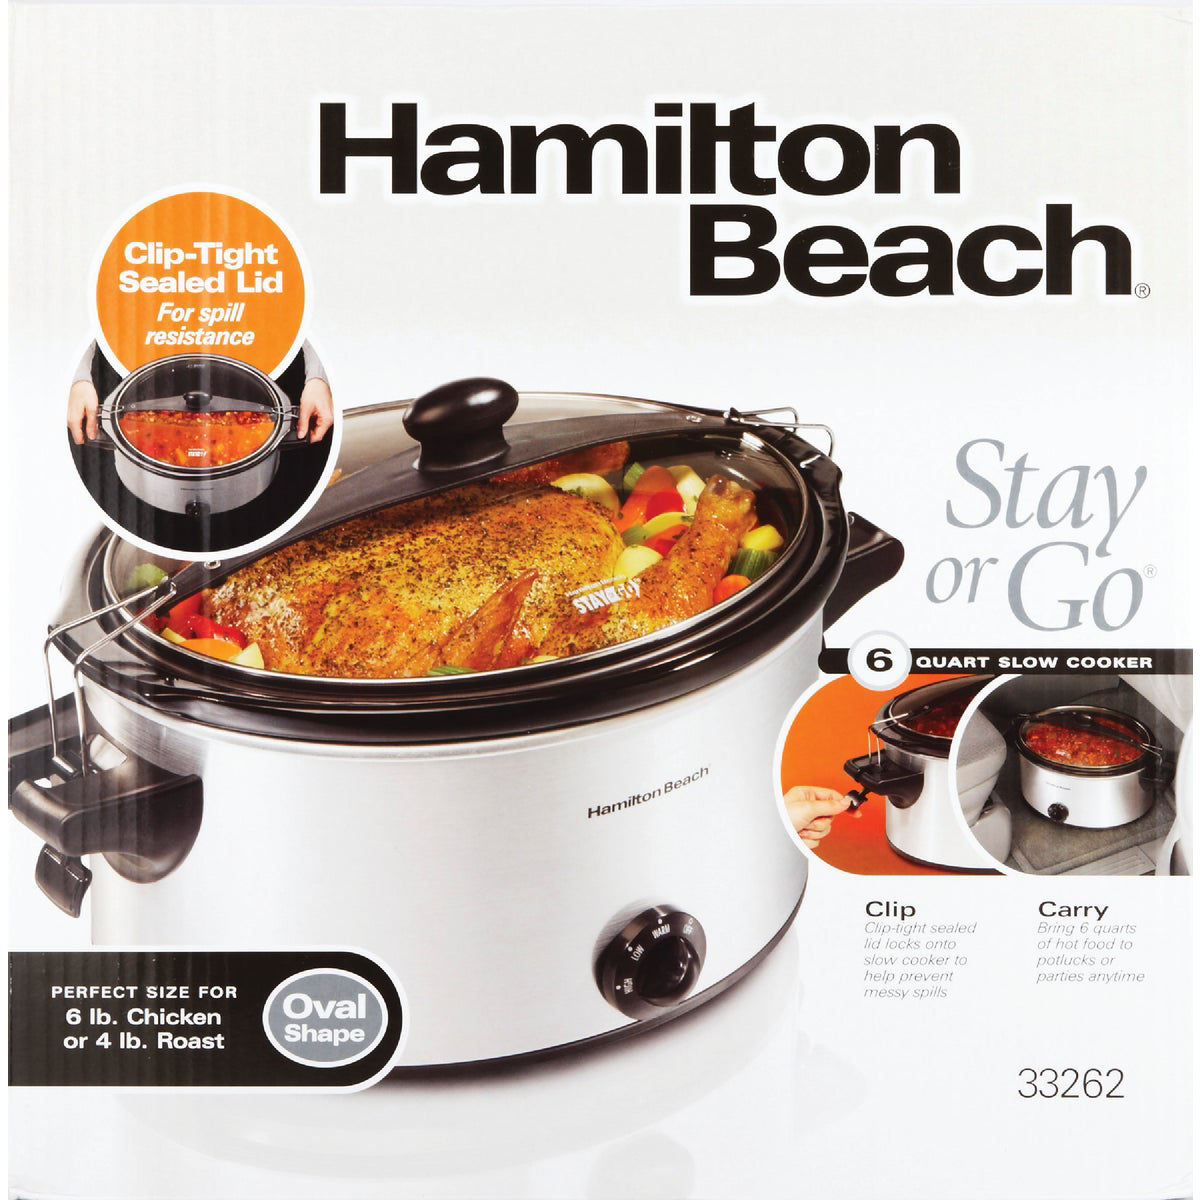 Hamilton Beach 33262 Stay Or Go Slow Cooker - 6 qt - Stainless Steel